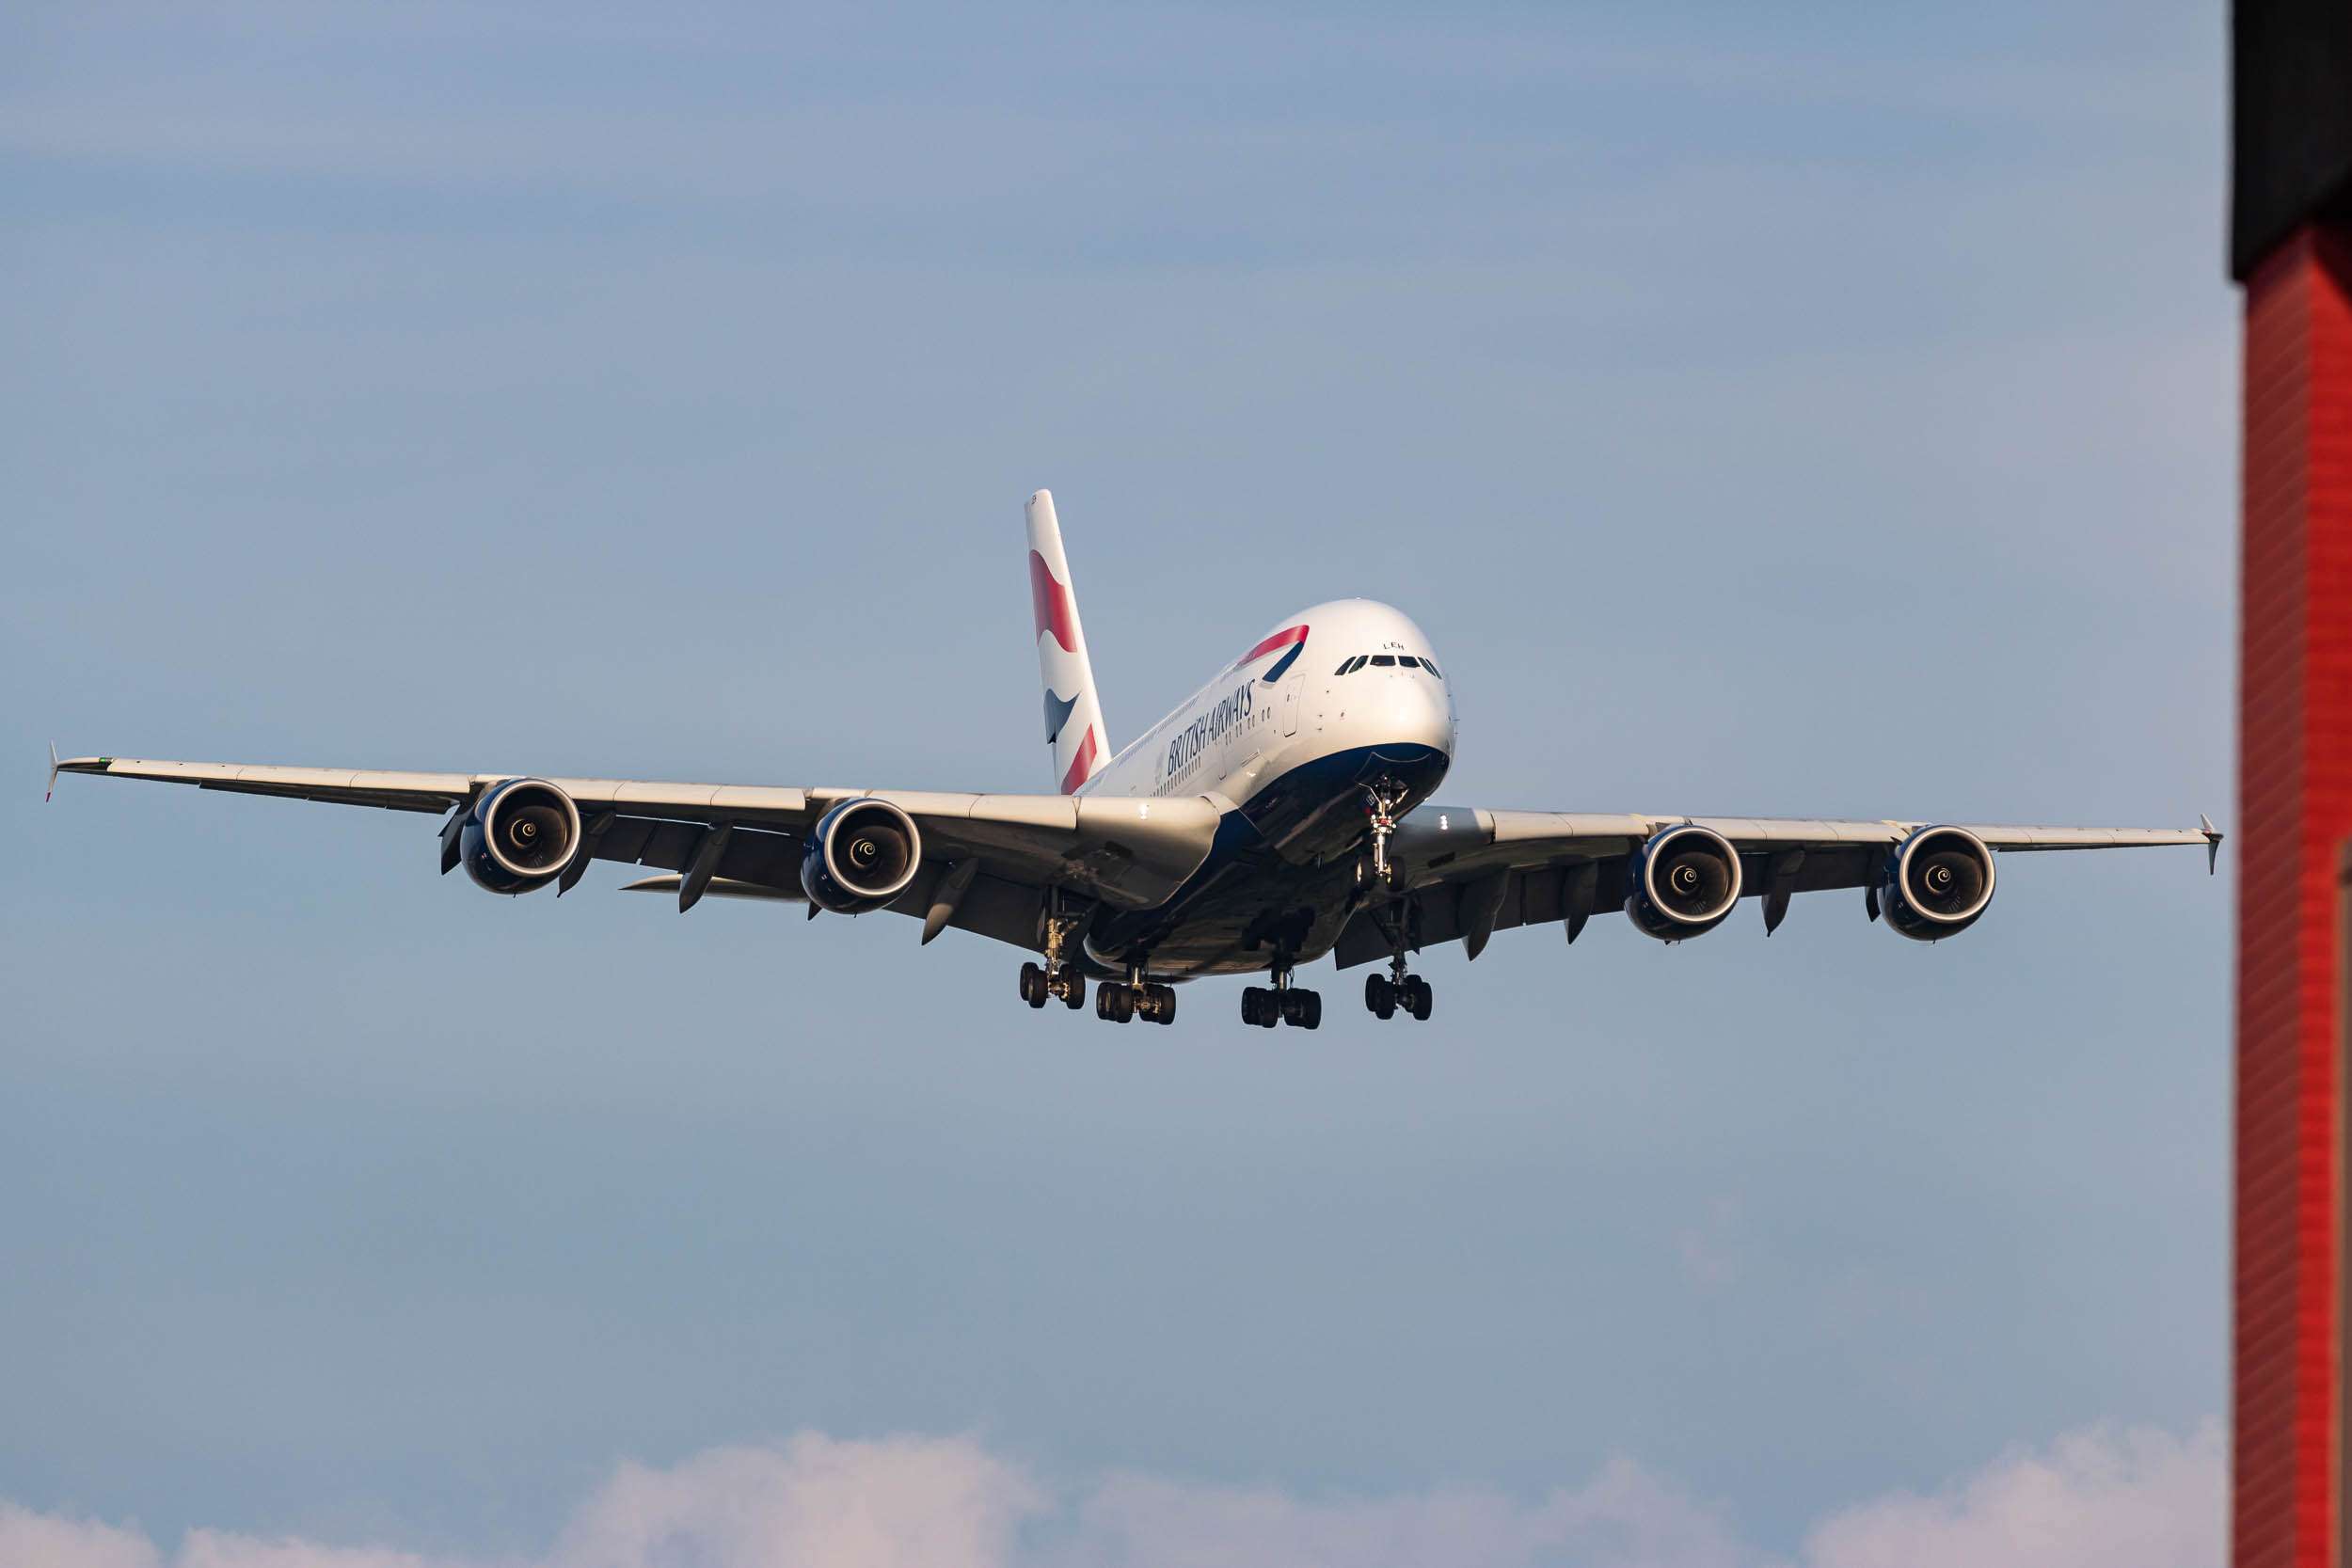 A British Airways Airbus A380 about to land